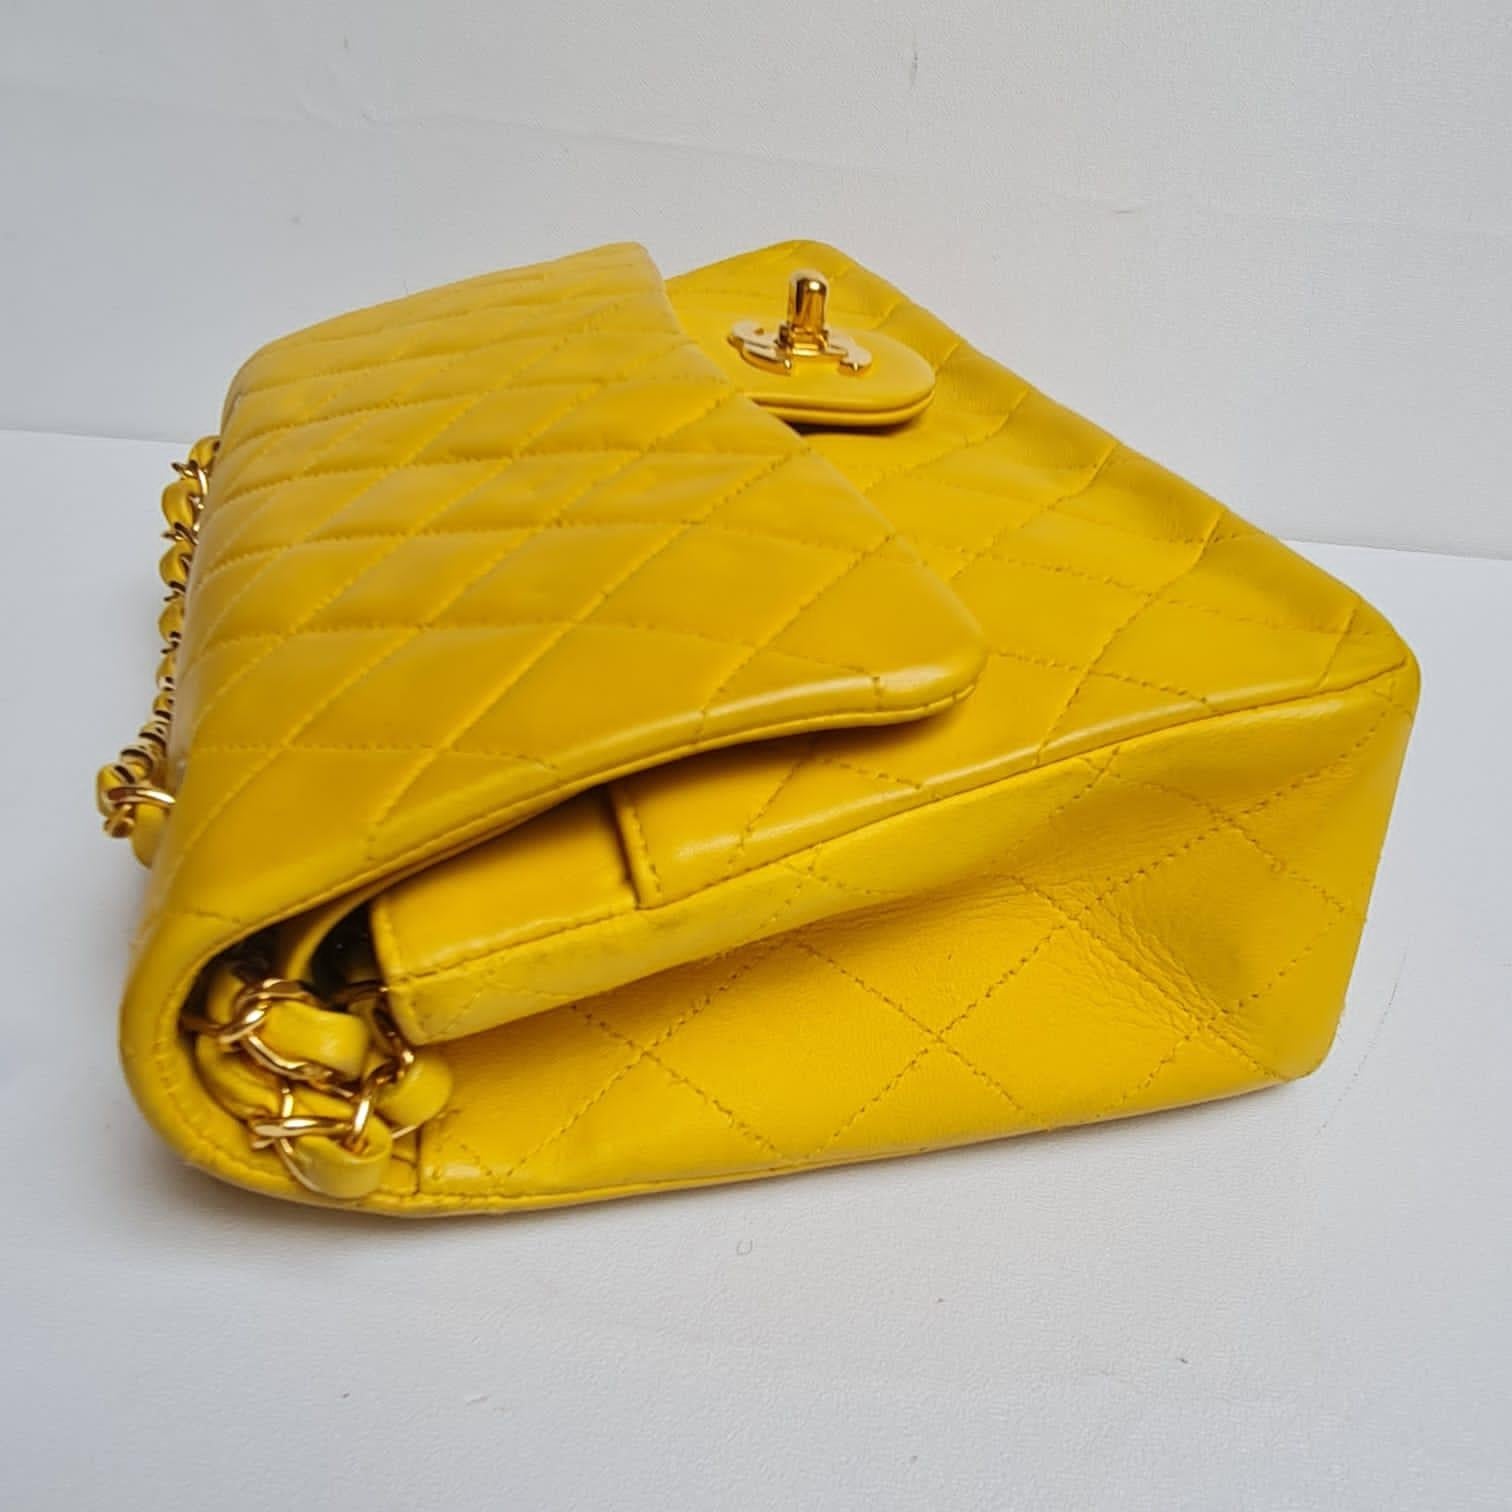 Vintage 1990s Chanel Yellow Lambskin Quilted Double Flap Bag In Good Condition For Sale In Jakarta, Daerah Khusus Ibukota Jakarta